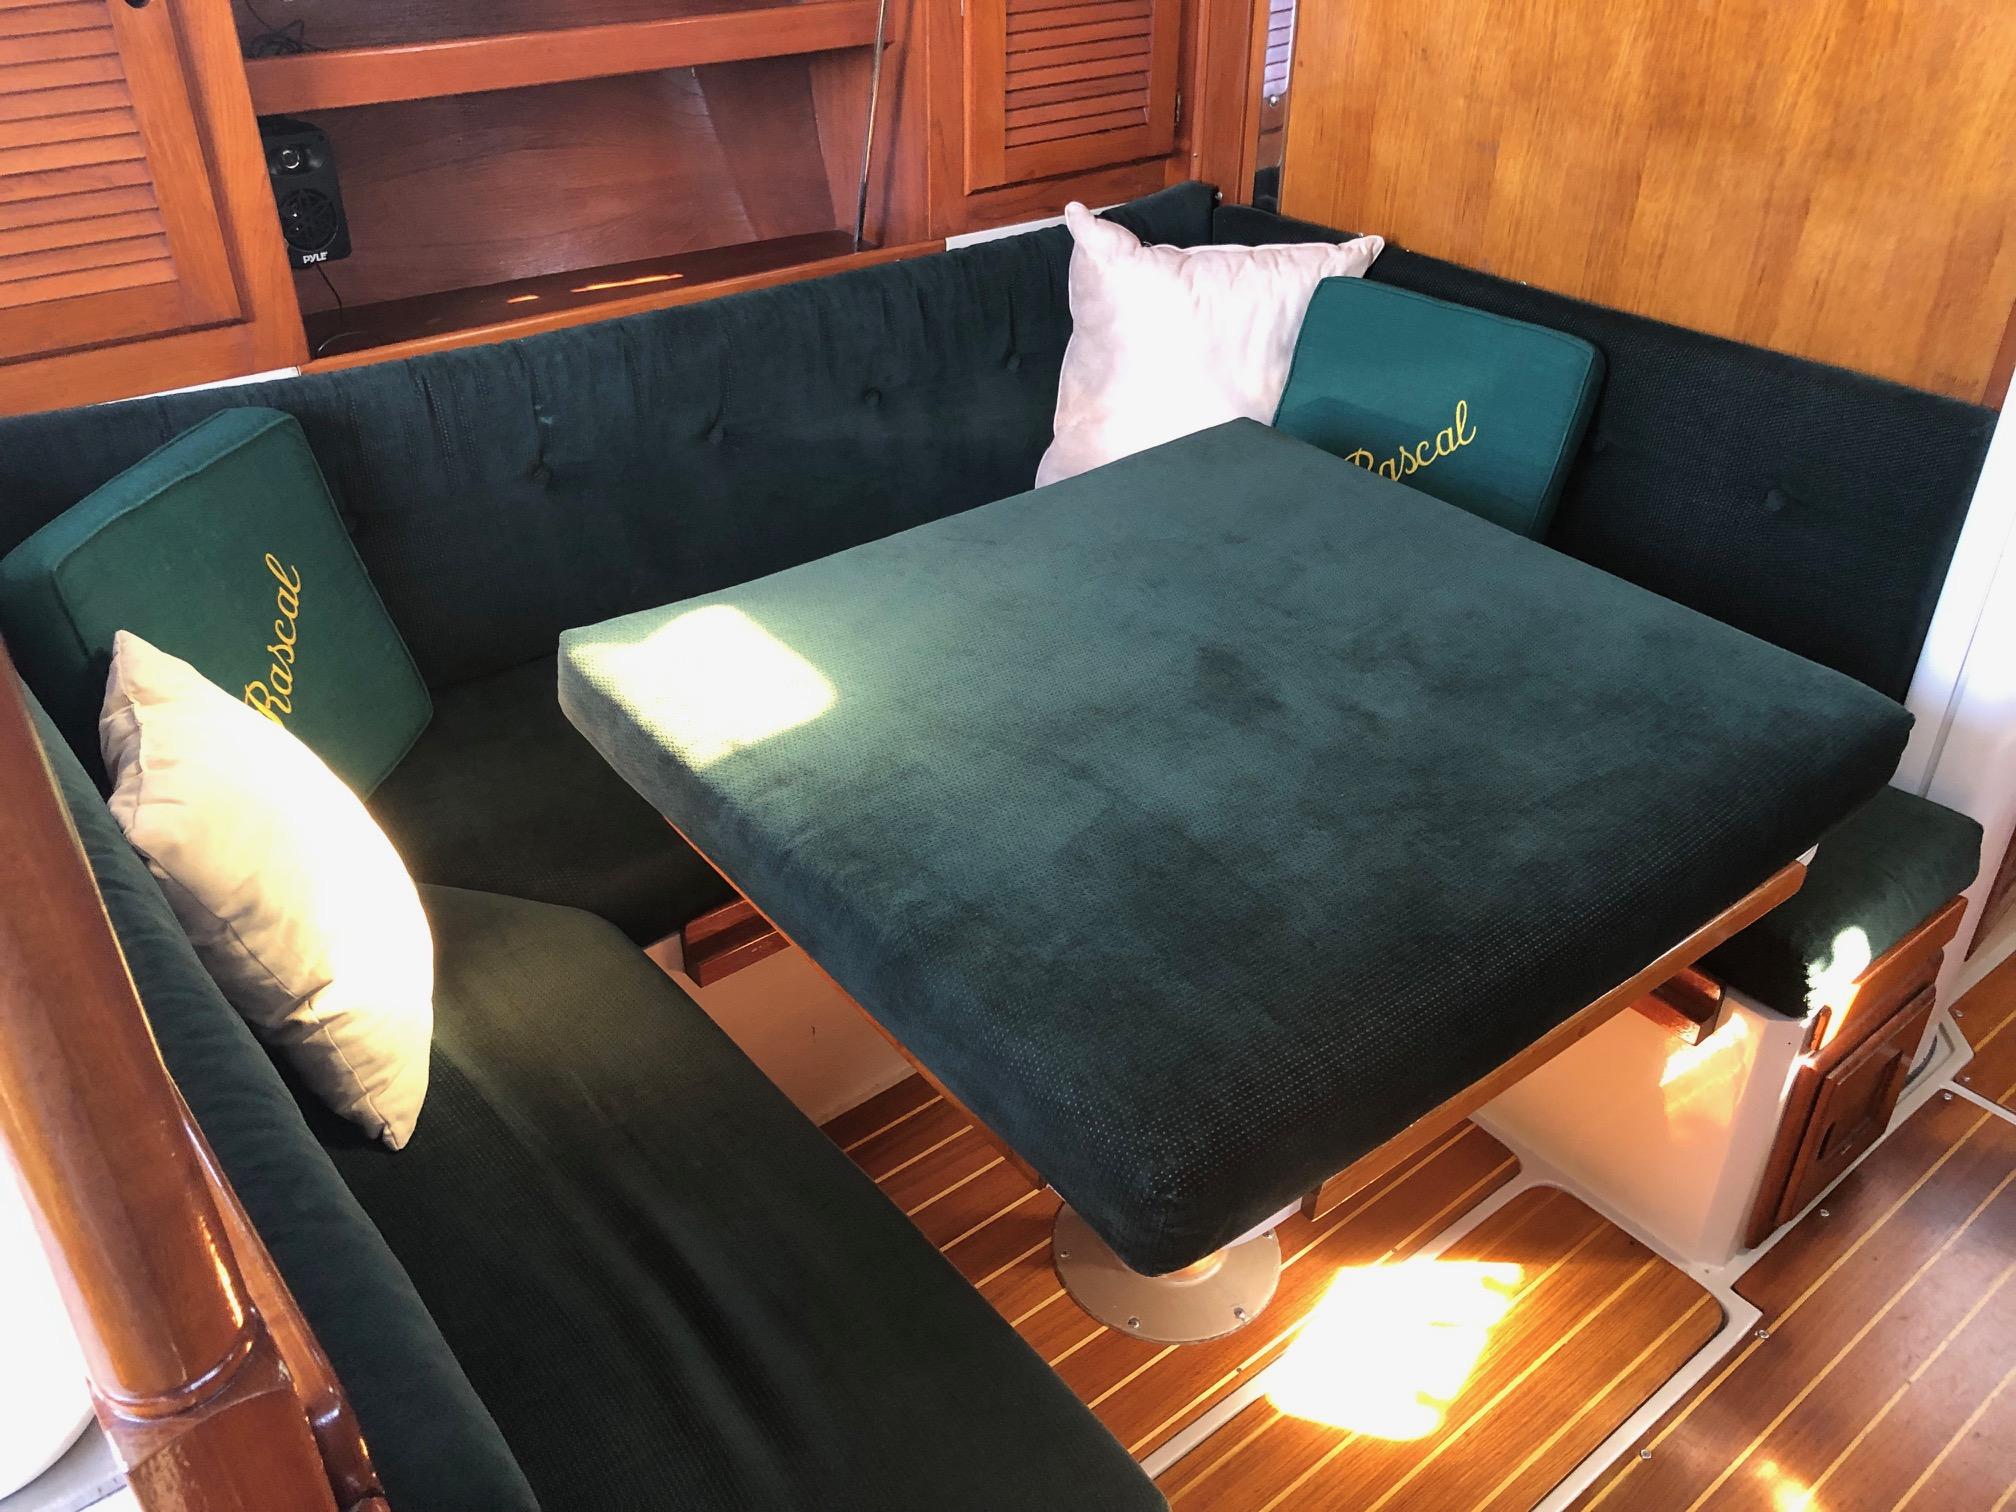 Dinette w/ cushion to convert to double berth